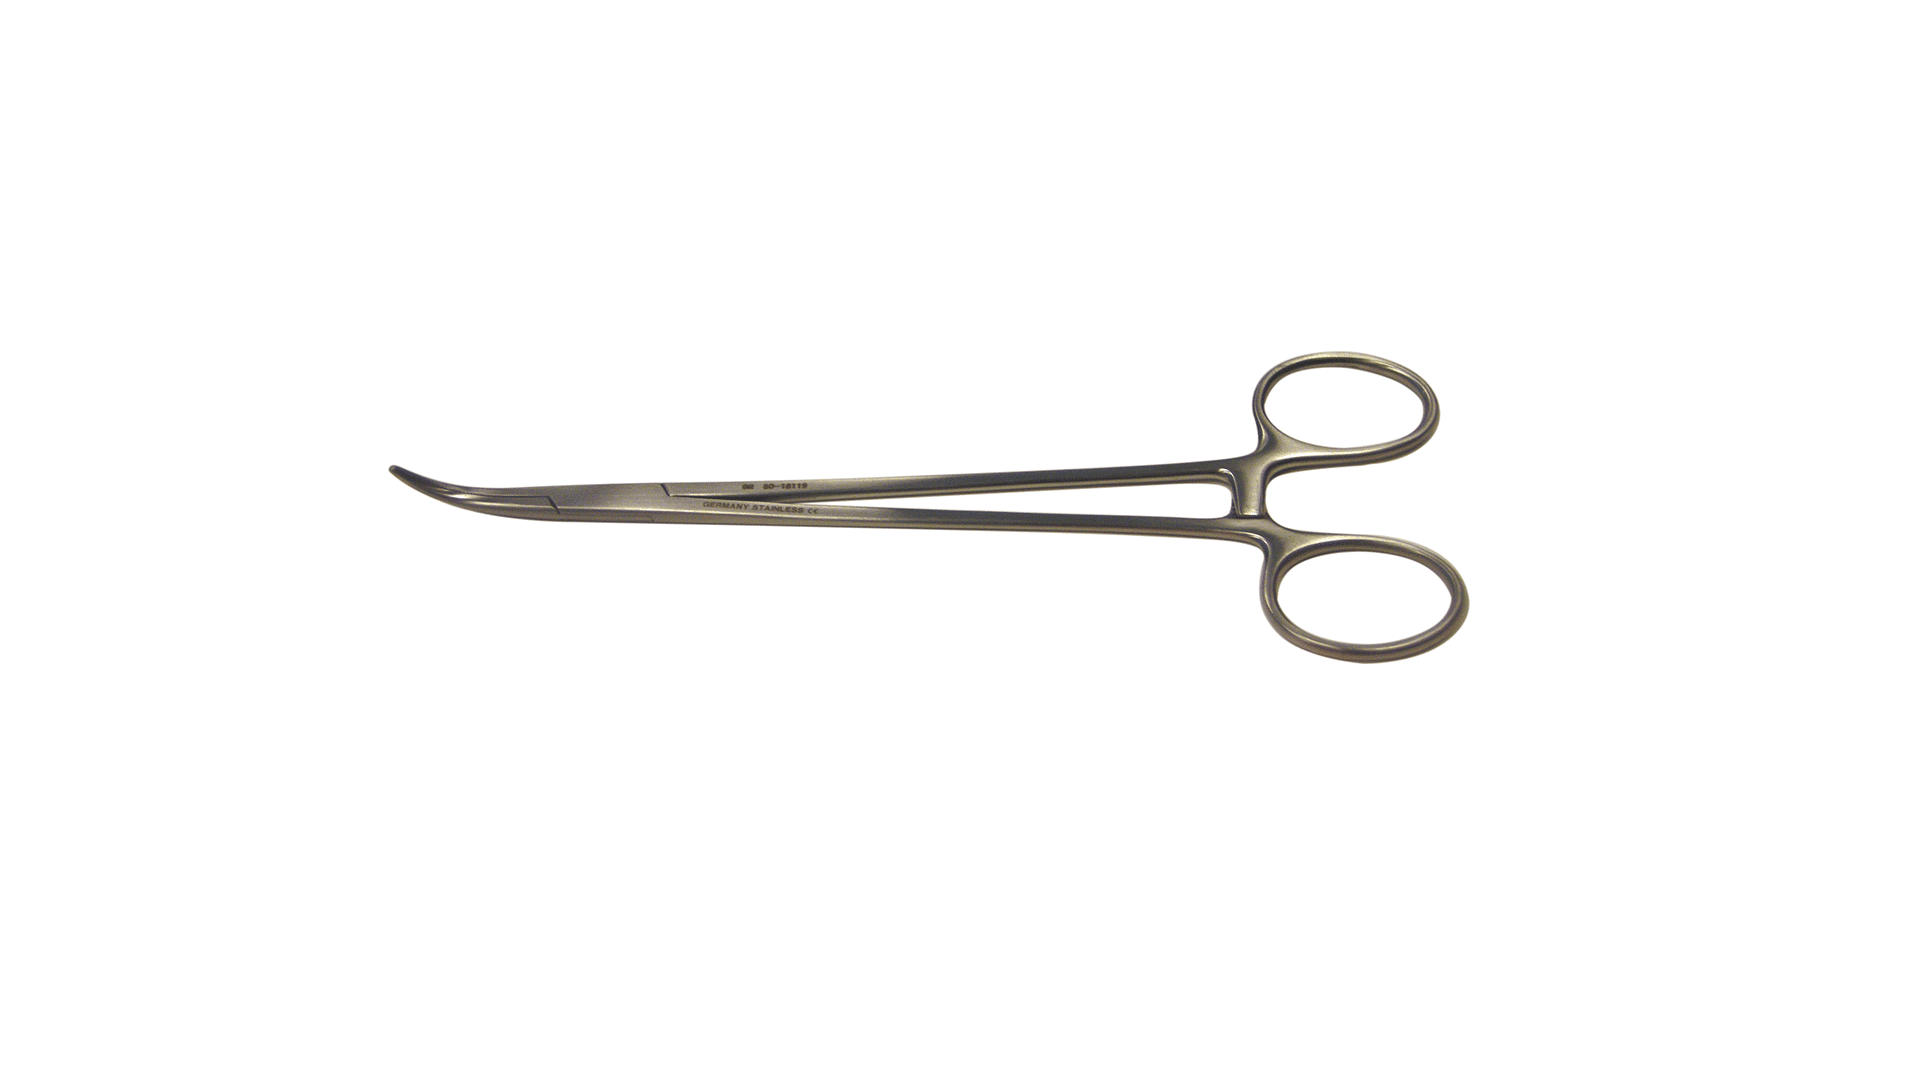 SAWTELL TONSIL FORCEP, RING HANDLE, CURVED, SERRATED, 7 1/2" GERMAN STAINLESS STEEL O.R. GRADE STAINLESS STEEL